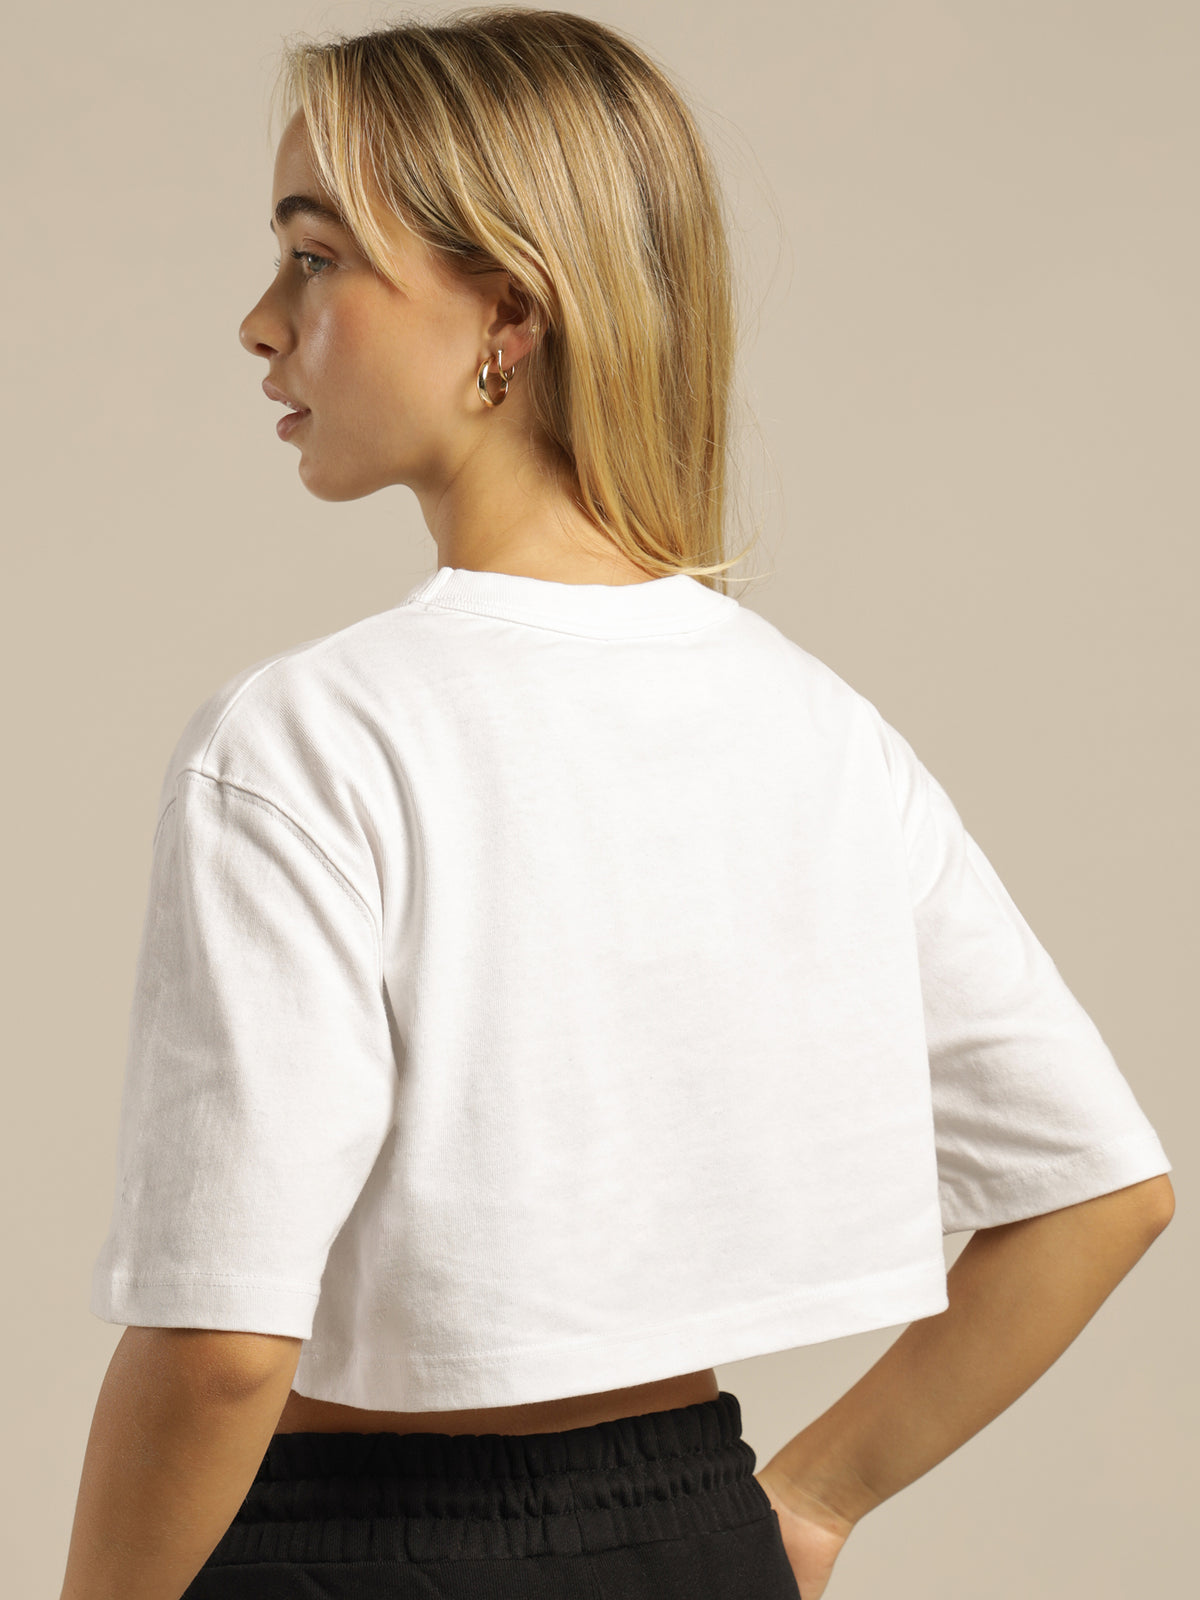 HT Archive Crop T-Shirt in White